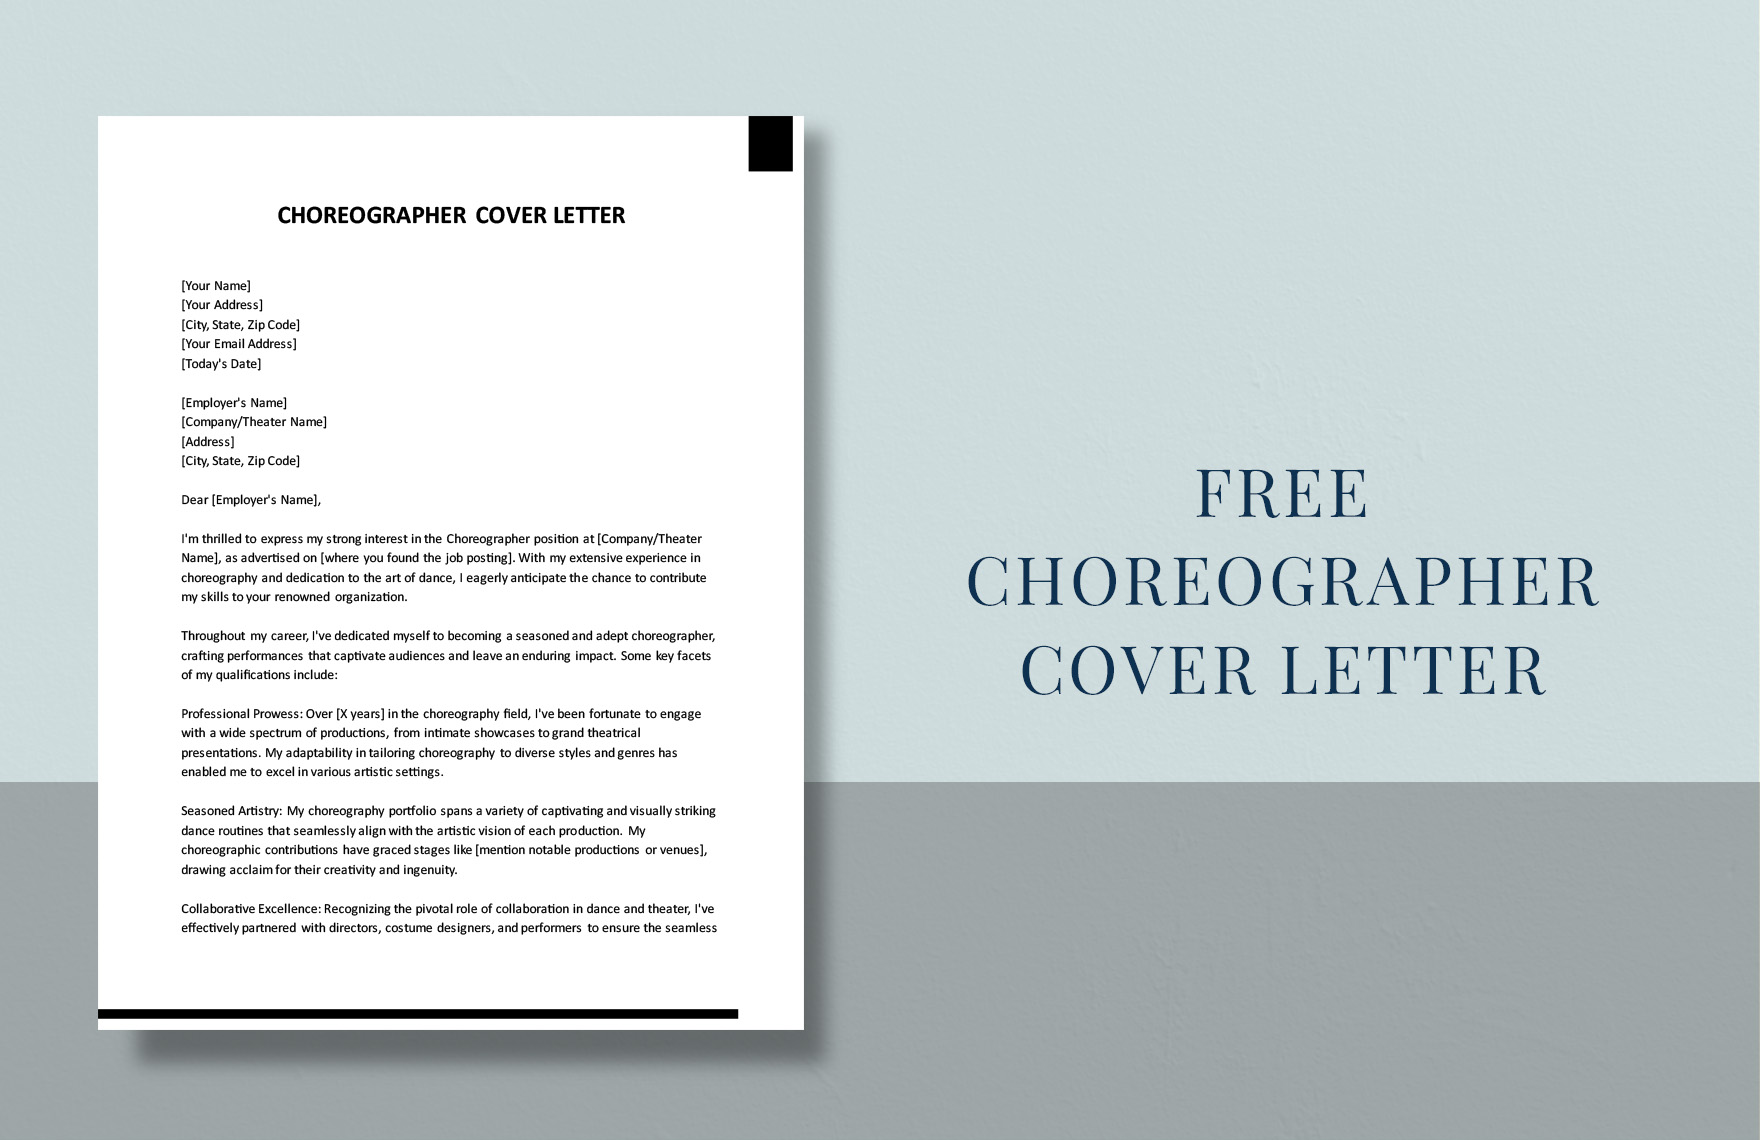 Choreographer Cover Letter in Word, Google Docs, PDF